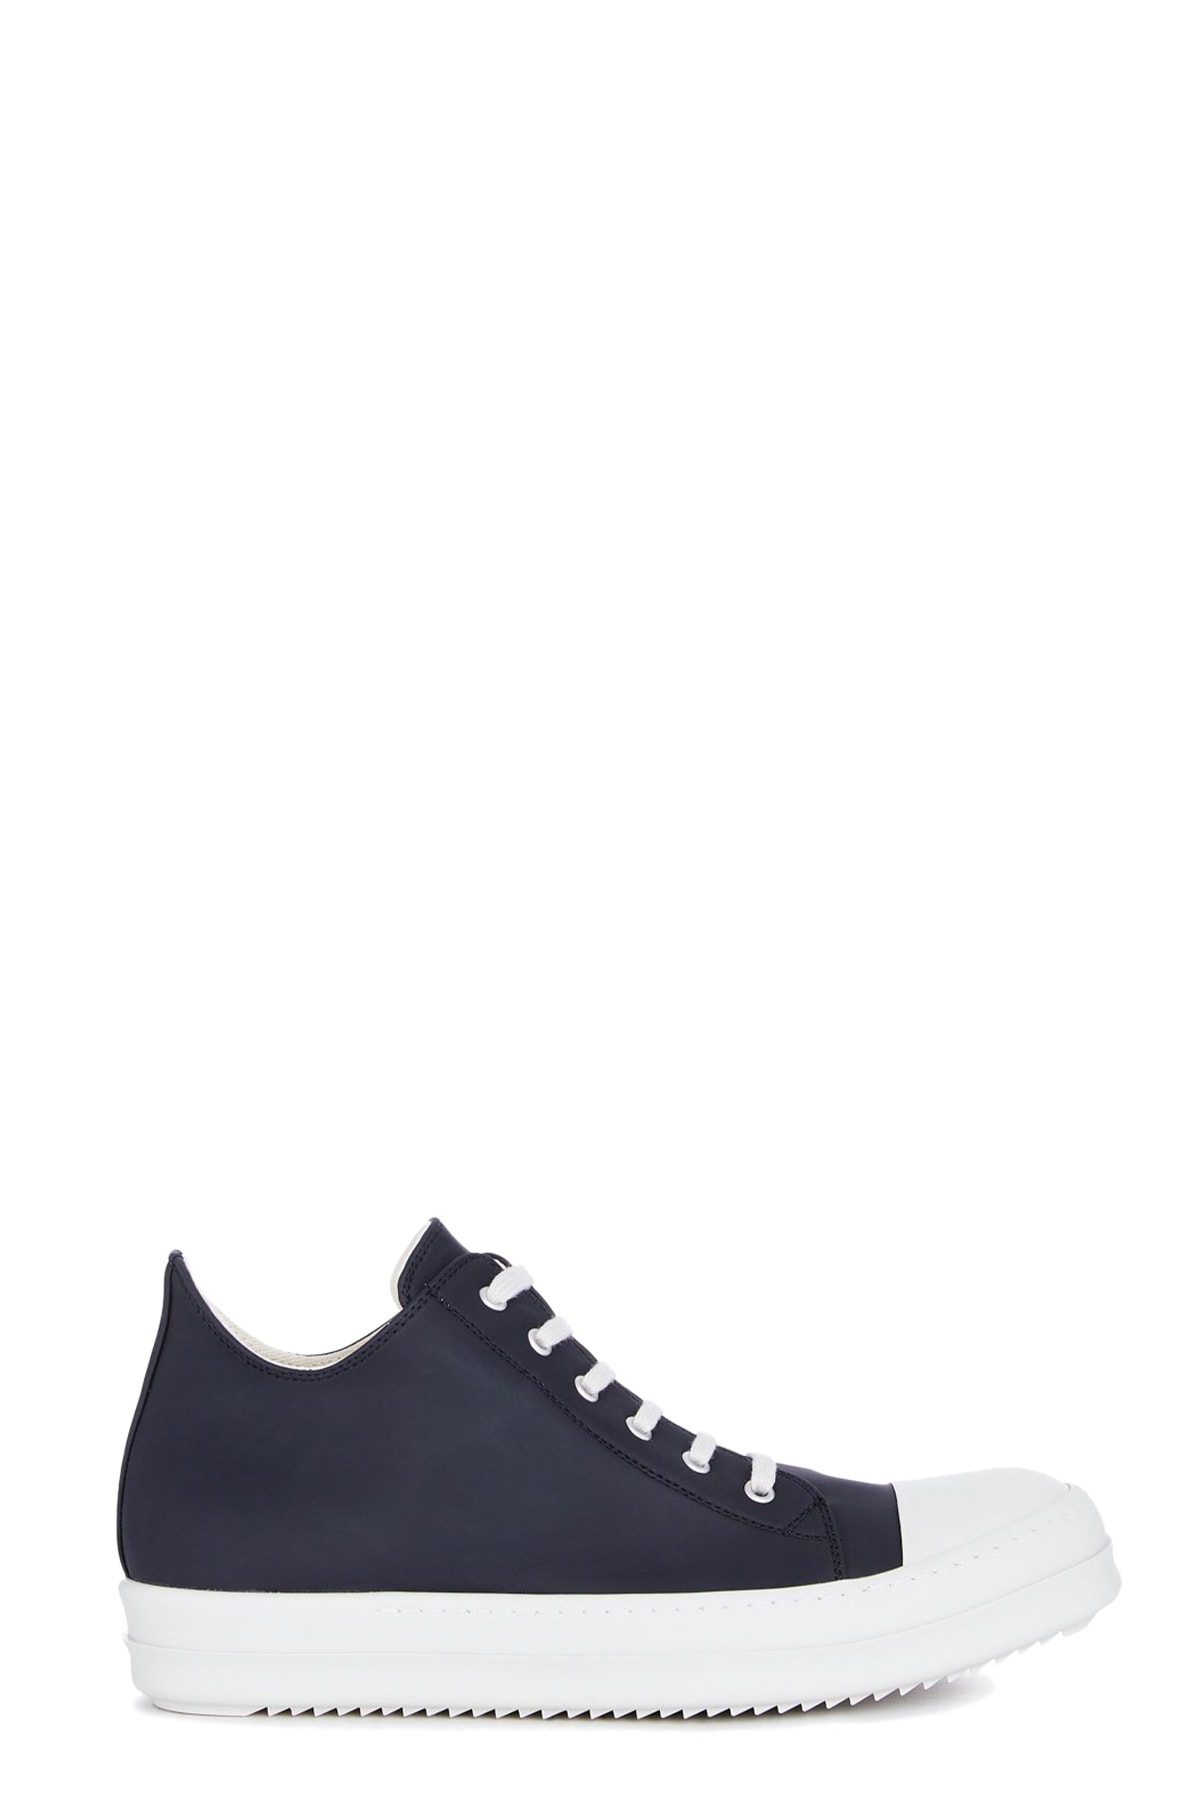 DRKSHDW LACE UP LOW SNEAKERS